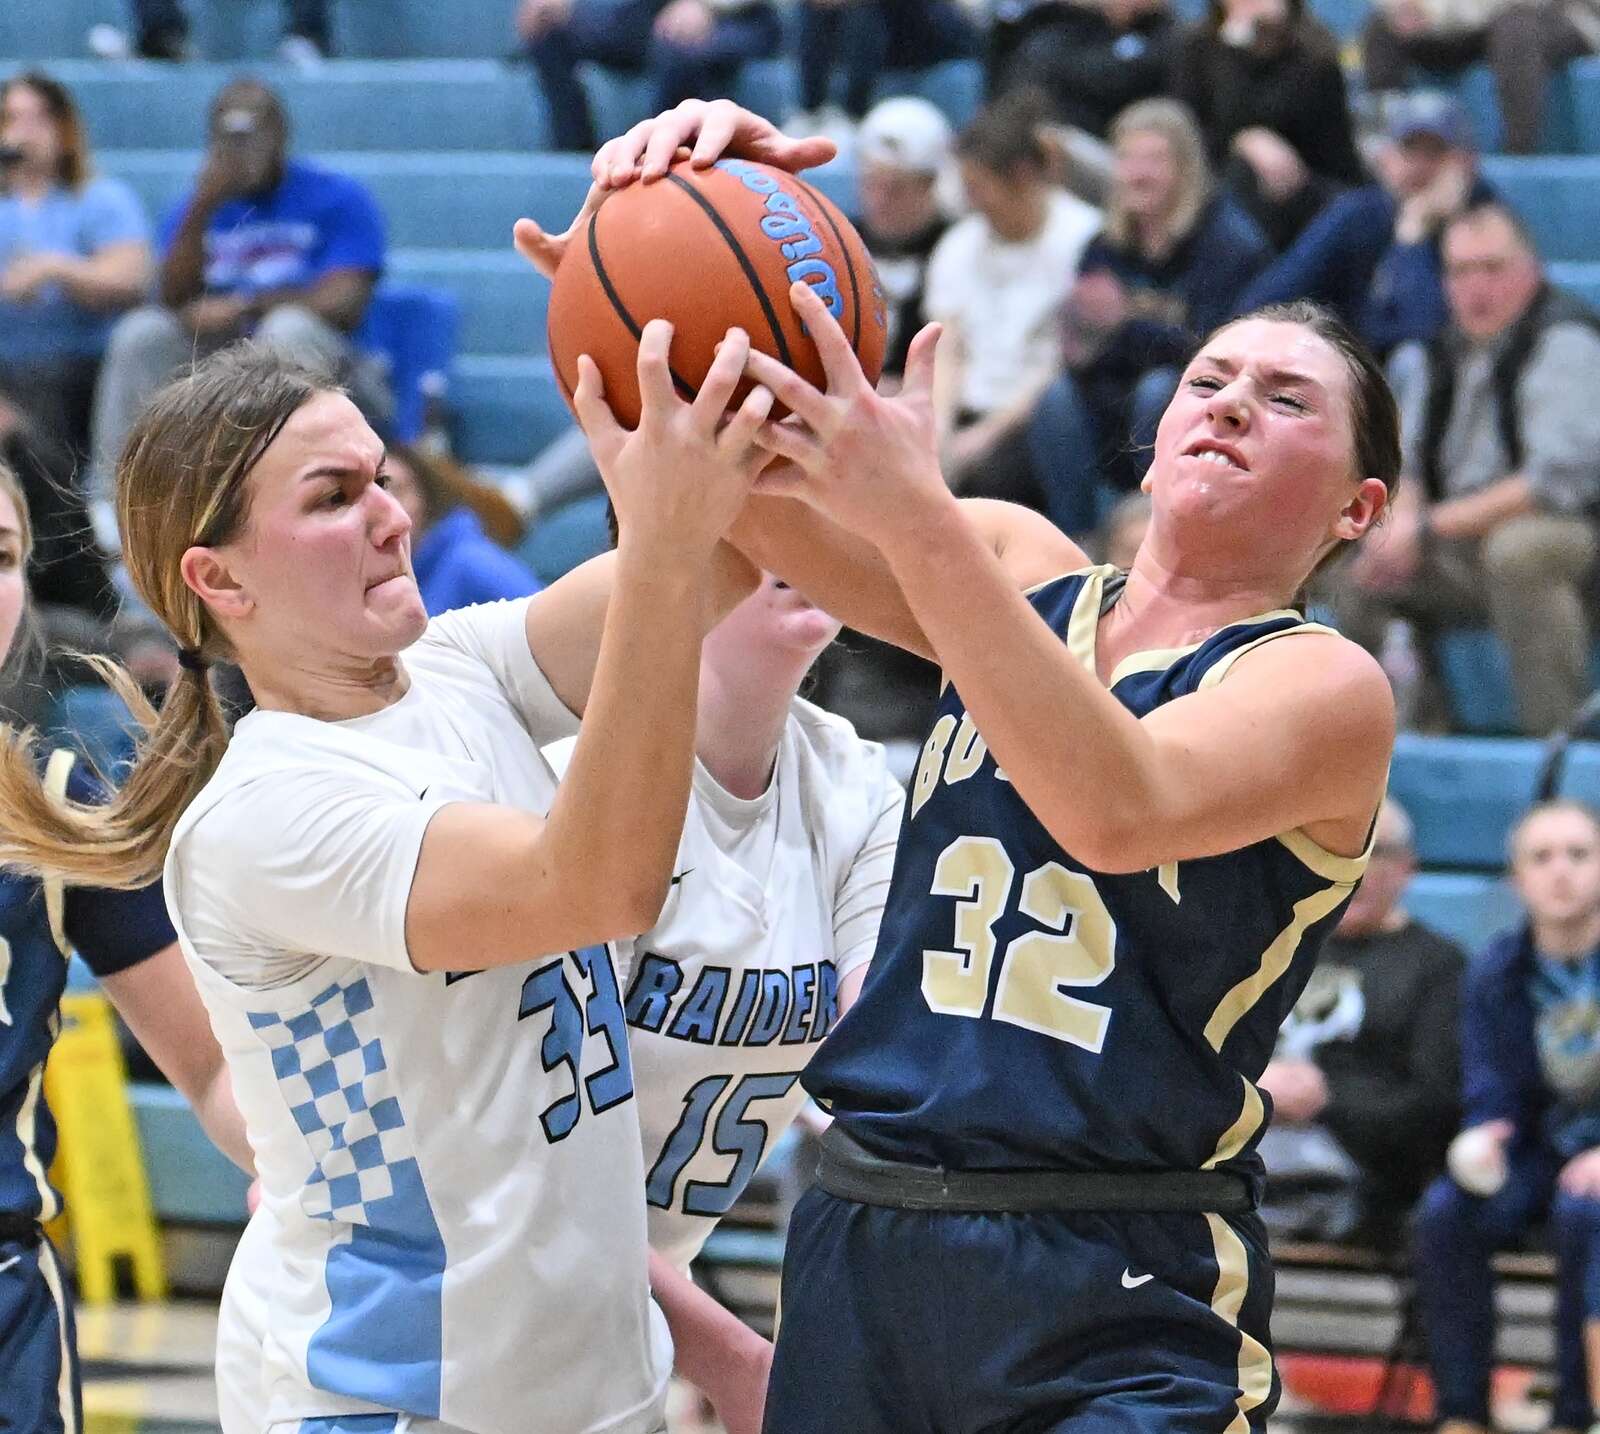 Seneca Valley’s Emerson Peffer fights for a ball against Butler’s Amelia McMichael